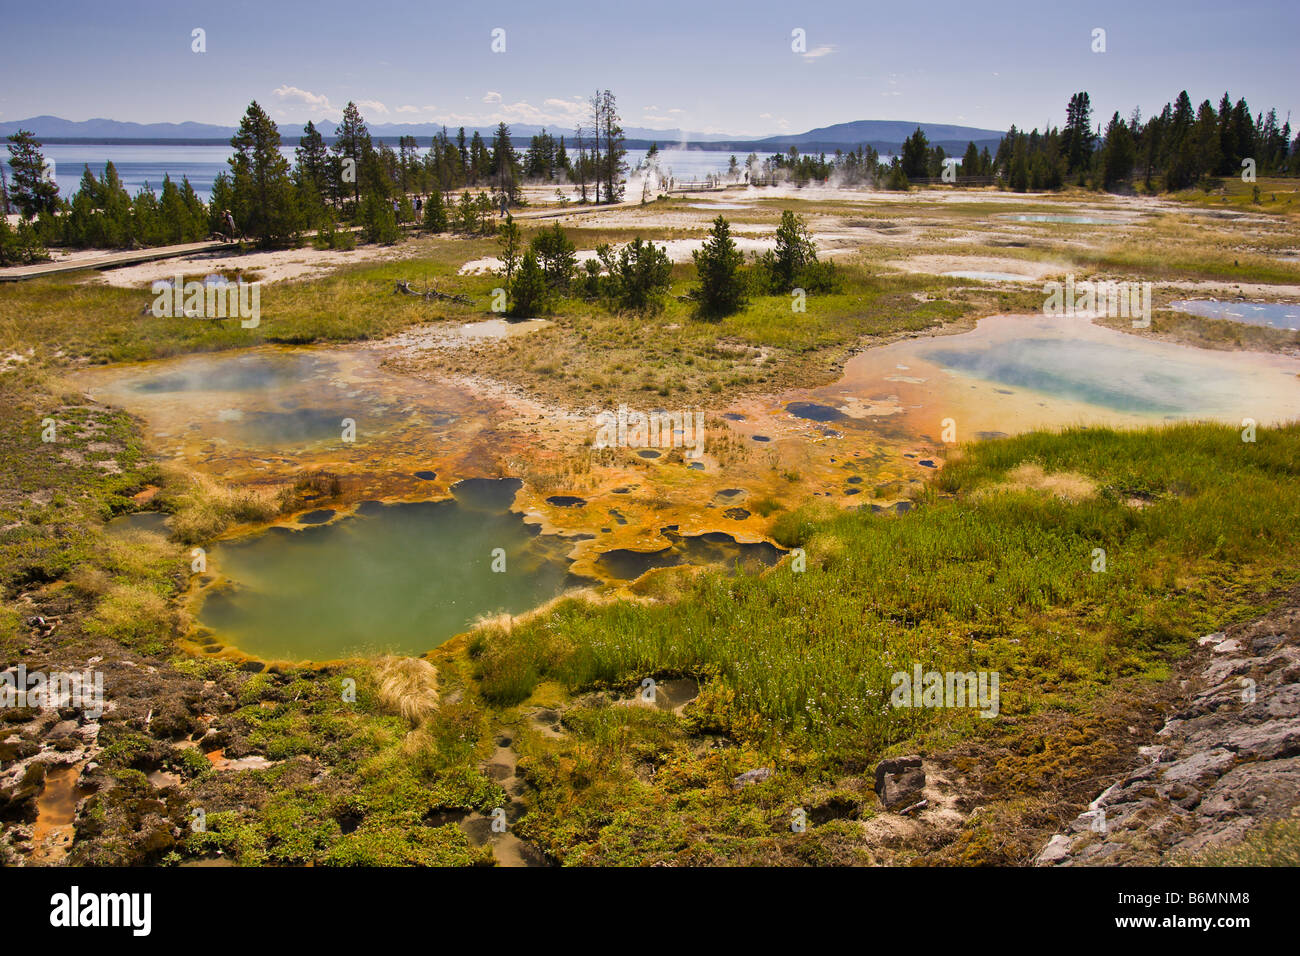 YELLOWSTONE NATIONAL PARK, WYOMING, USA - West Thumb Geyser Basin, and Yellowstone Lake in distance. Stock Photo